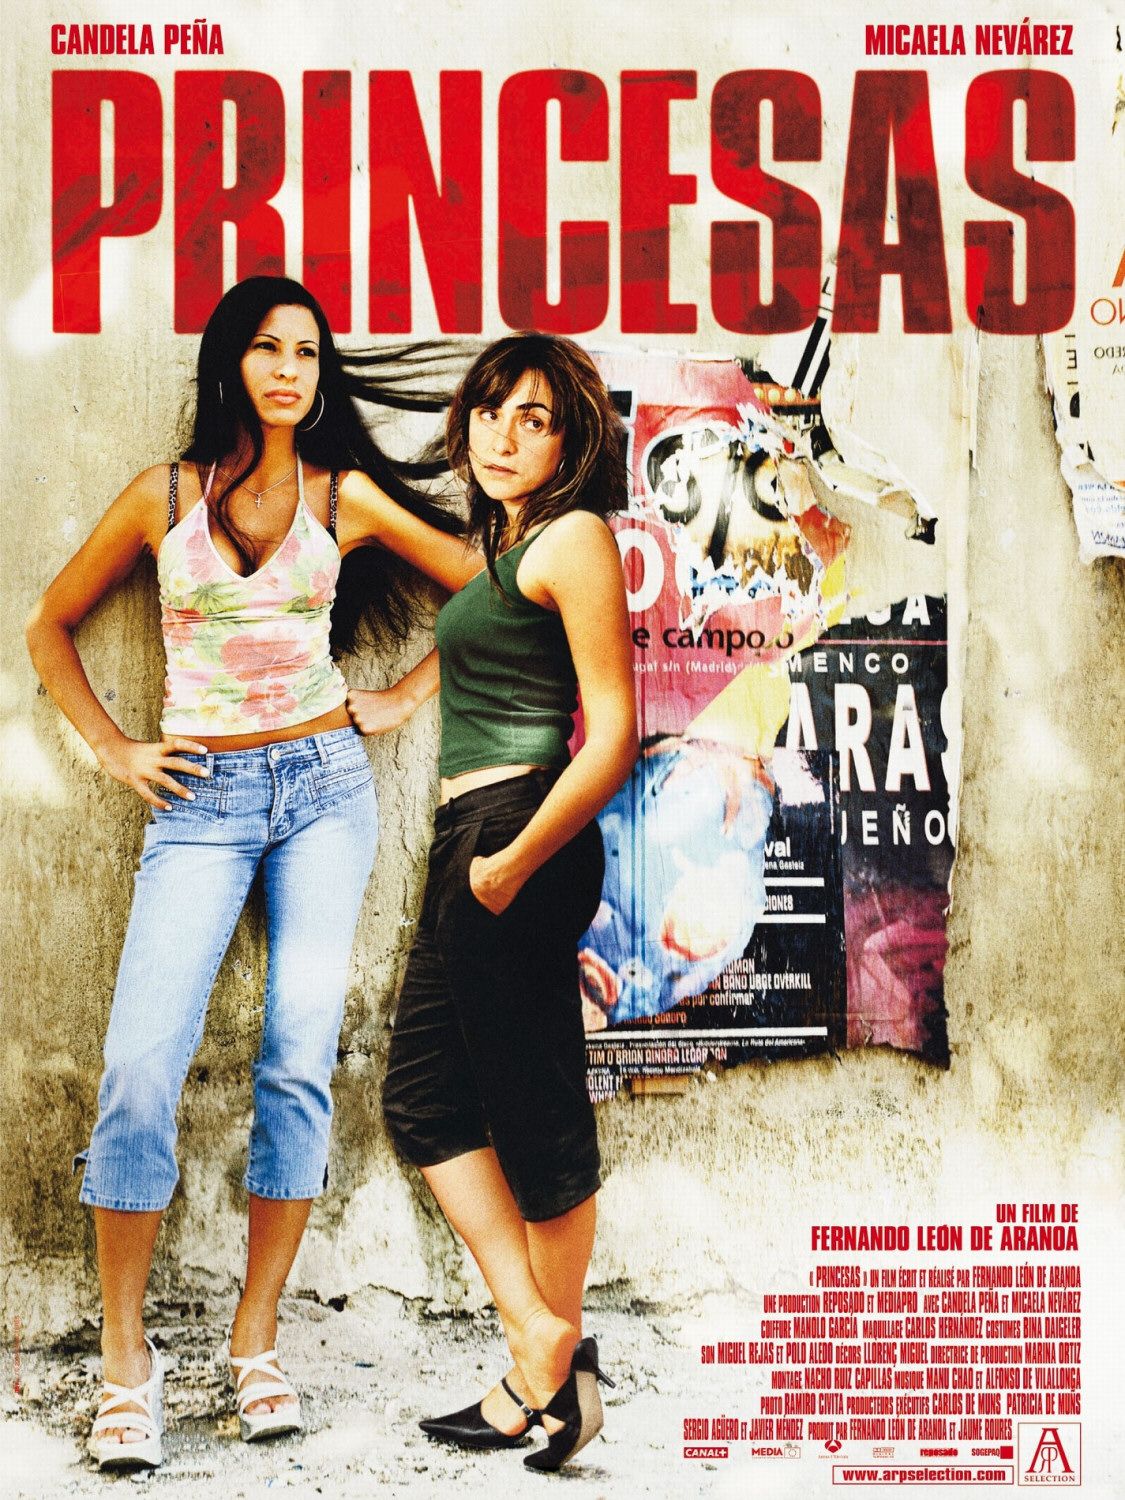 Extra Large Movie Poster Image for Princesas (#2 of 2)